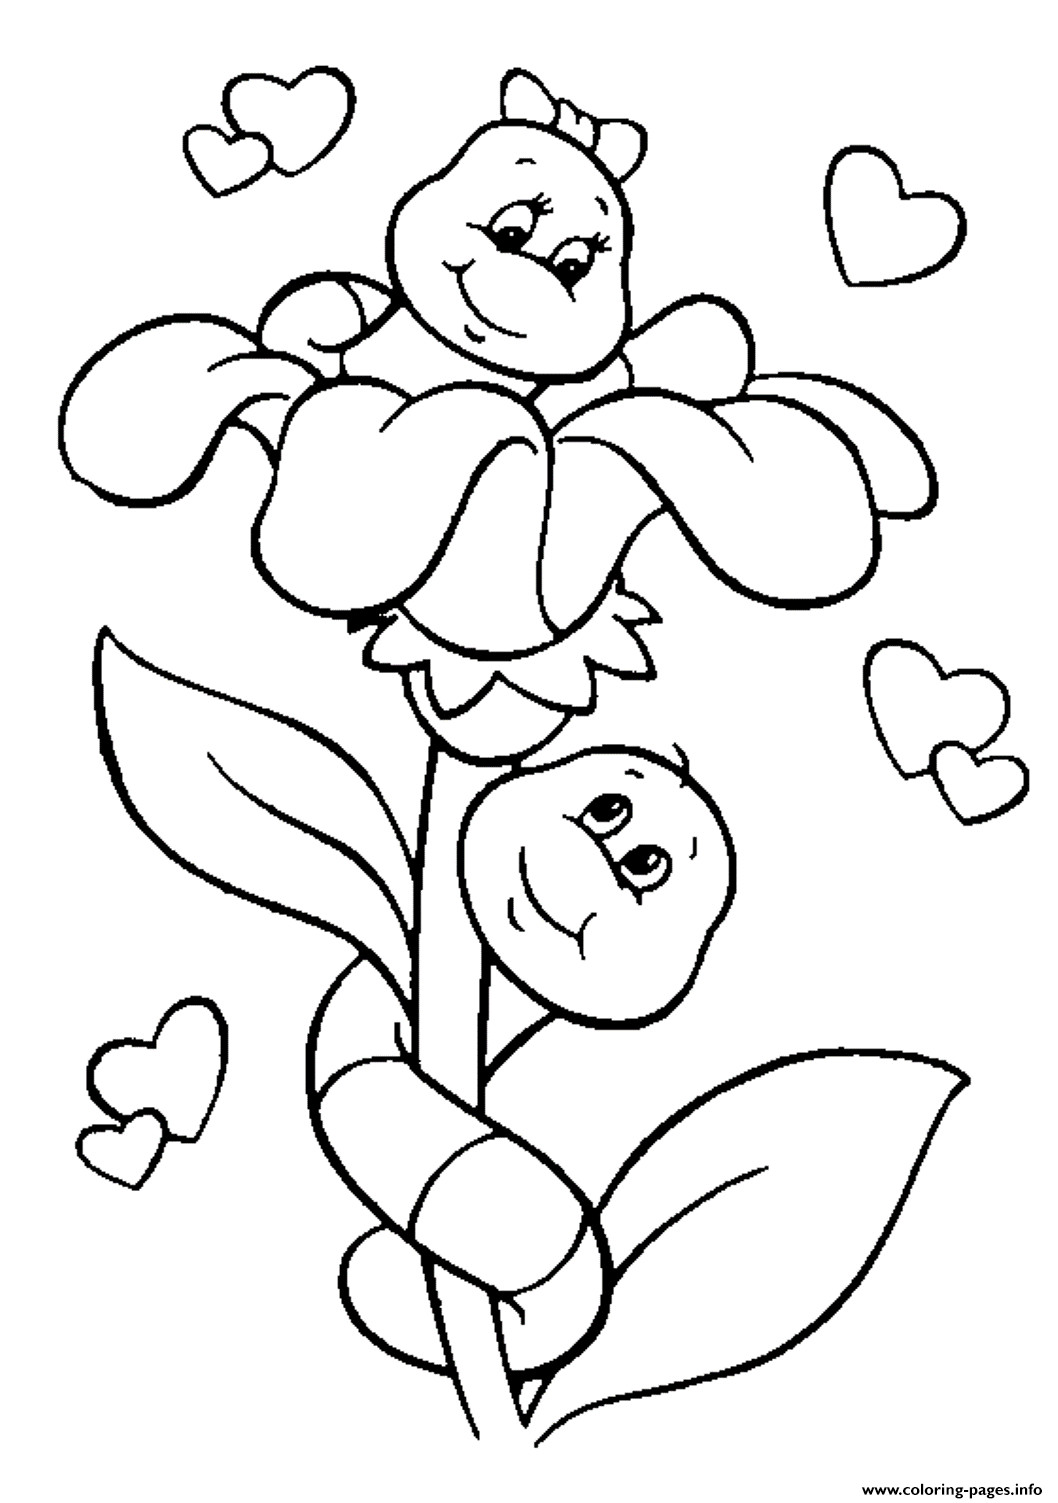 Valentine Coloring Pages For Girls
 Flower And Caterpillar In Love Valentine S9195 Coloring